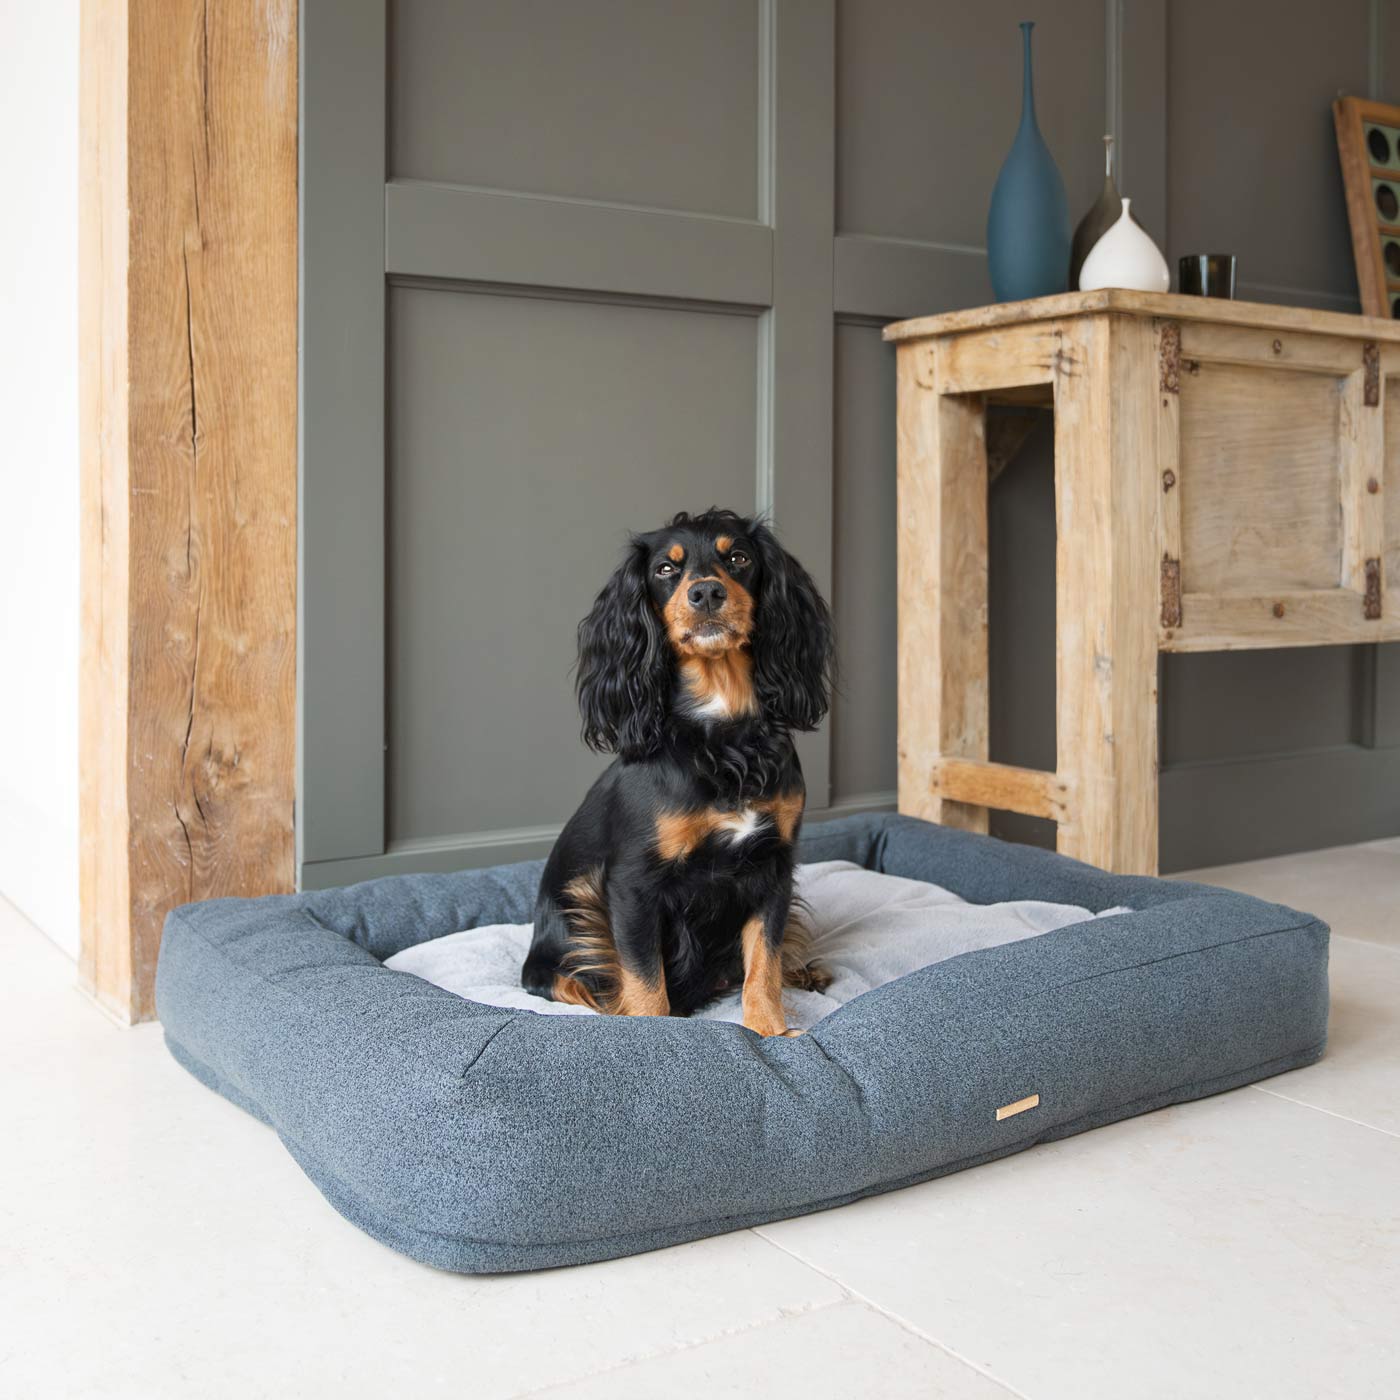 Discover Our Luxurious Comfort Cube Dog Bed in Anthracite (Navy), featuring Removable covers for easy machine washing and a non slip wipeable base. This super soft pet bed offers the ultimate comfort to your furry friend! Bringing Your Canine Companion The Perfect Bed For Dogs To Curl Up To! Available Now at Lords & Labradors